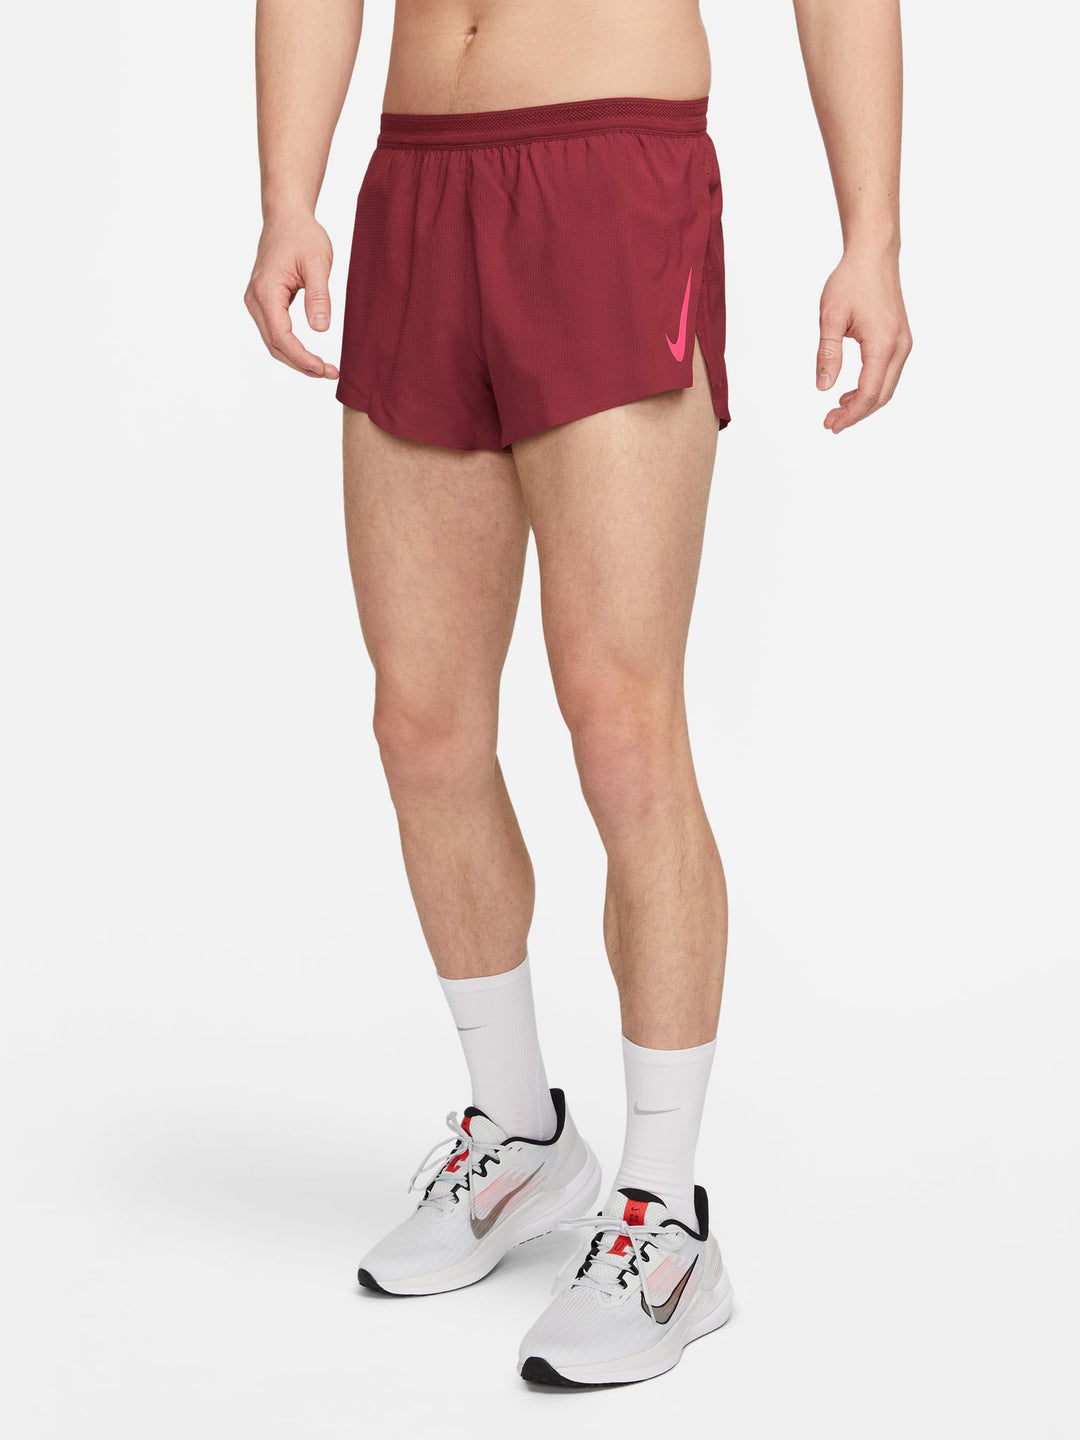 Nike Aeroswift 2 Brief-lined Racing Shorts in White for Men